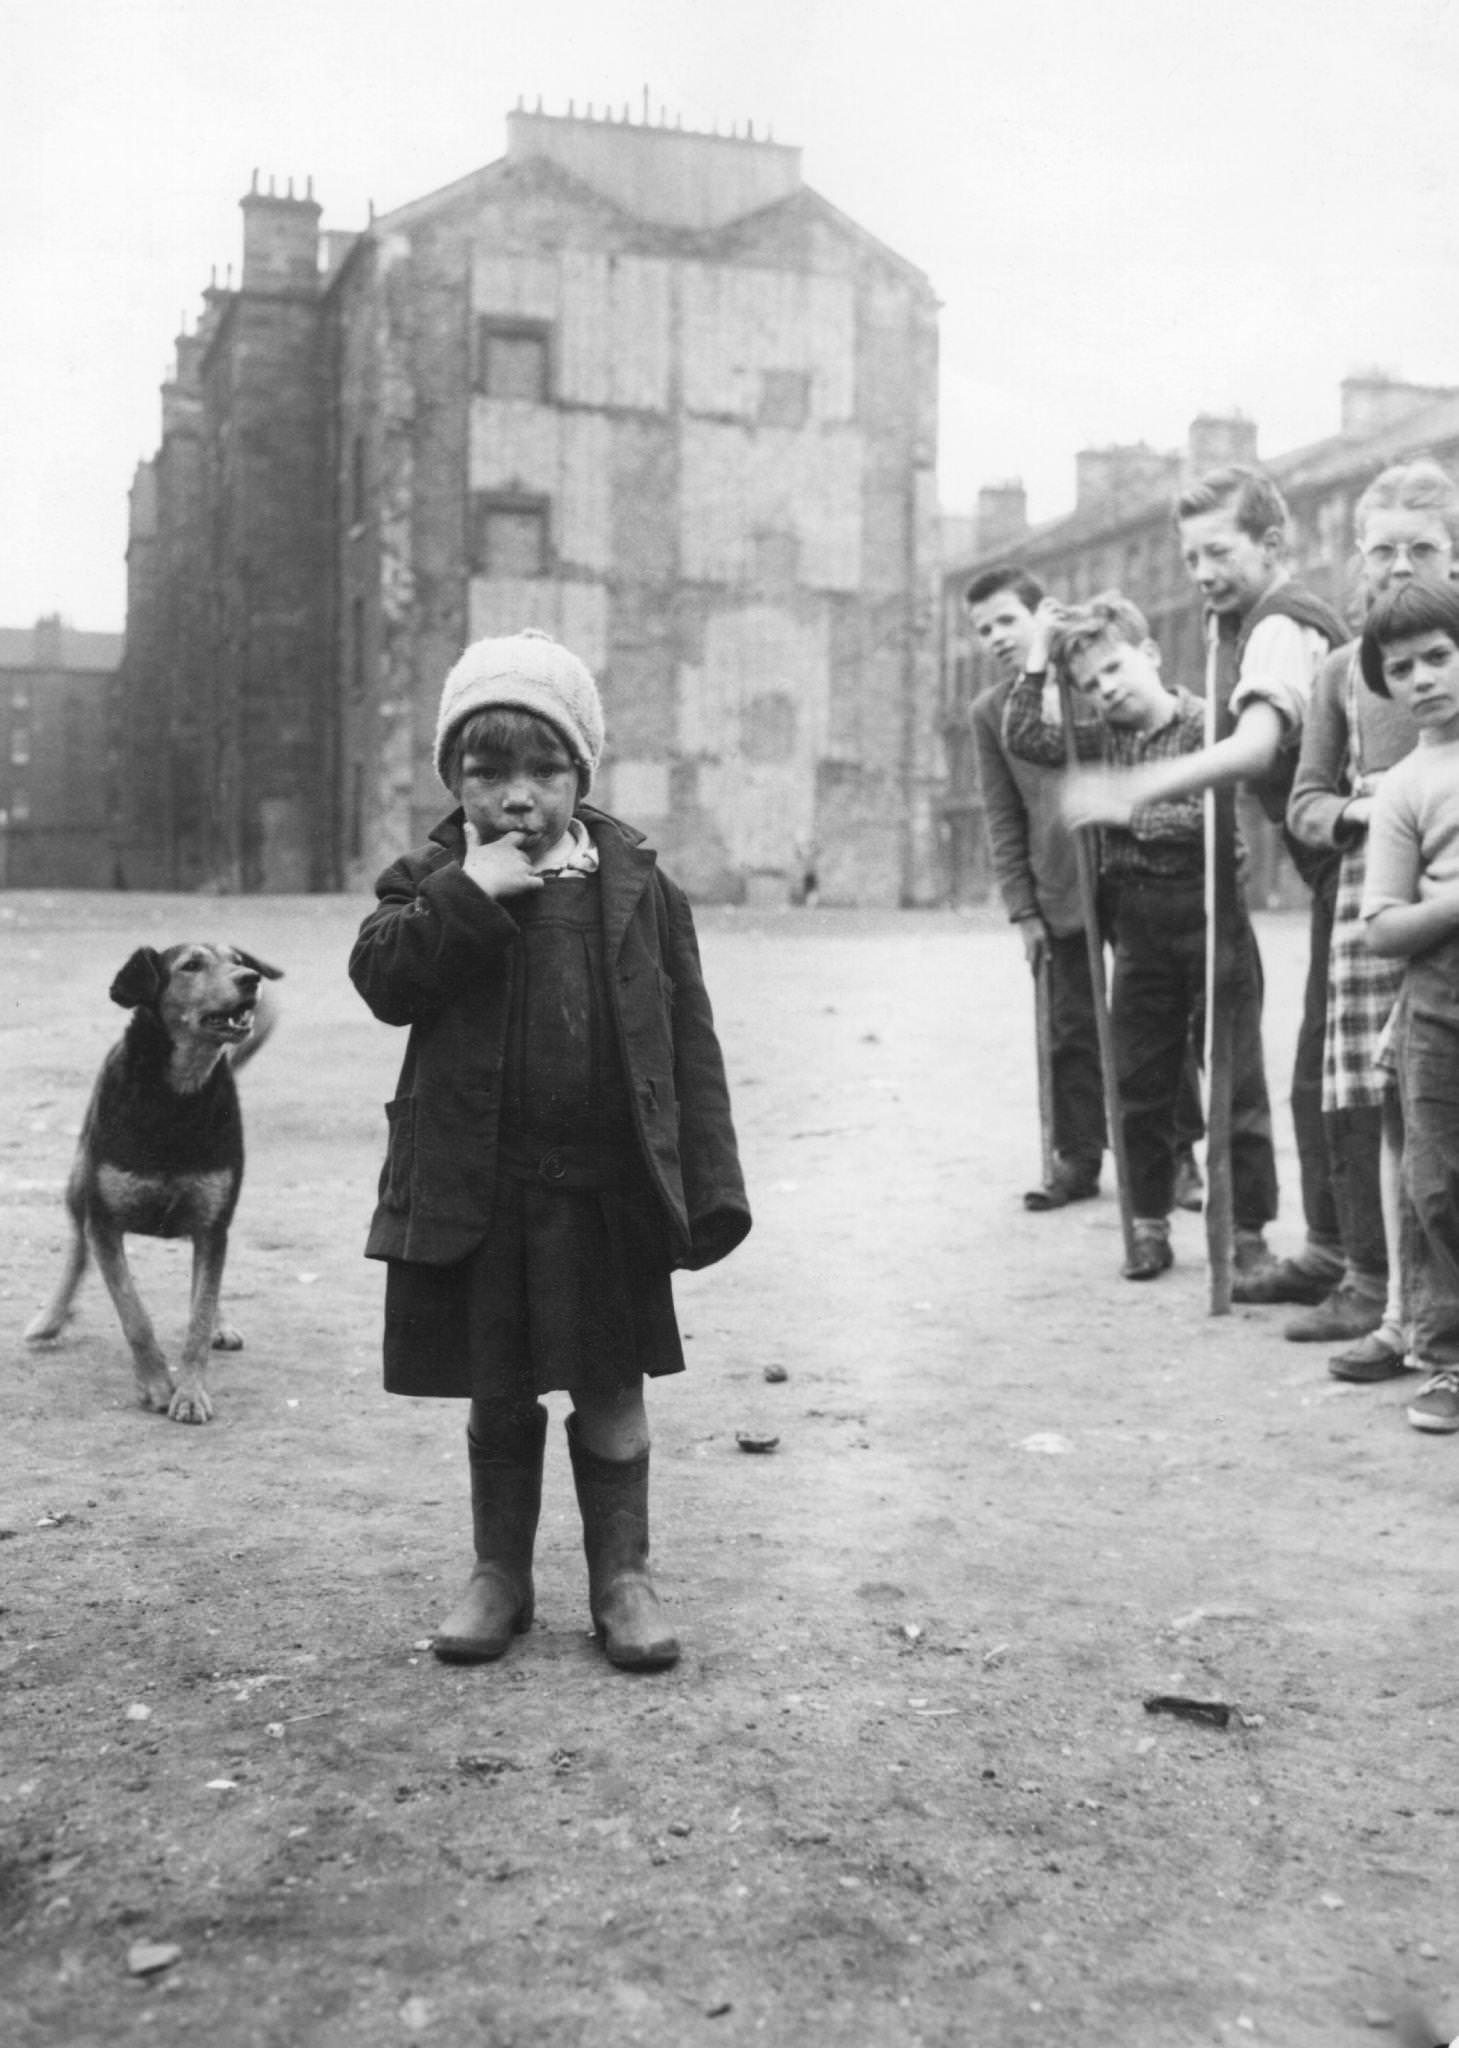 A dog barks at a girl in the Surrey Lane area of the Gorbals, Glasgow, 1956